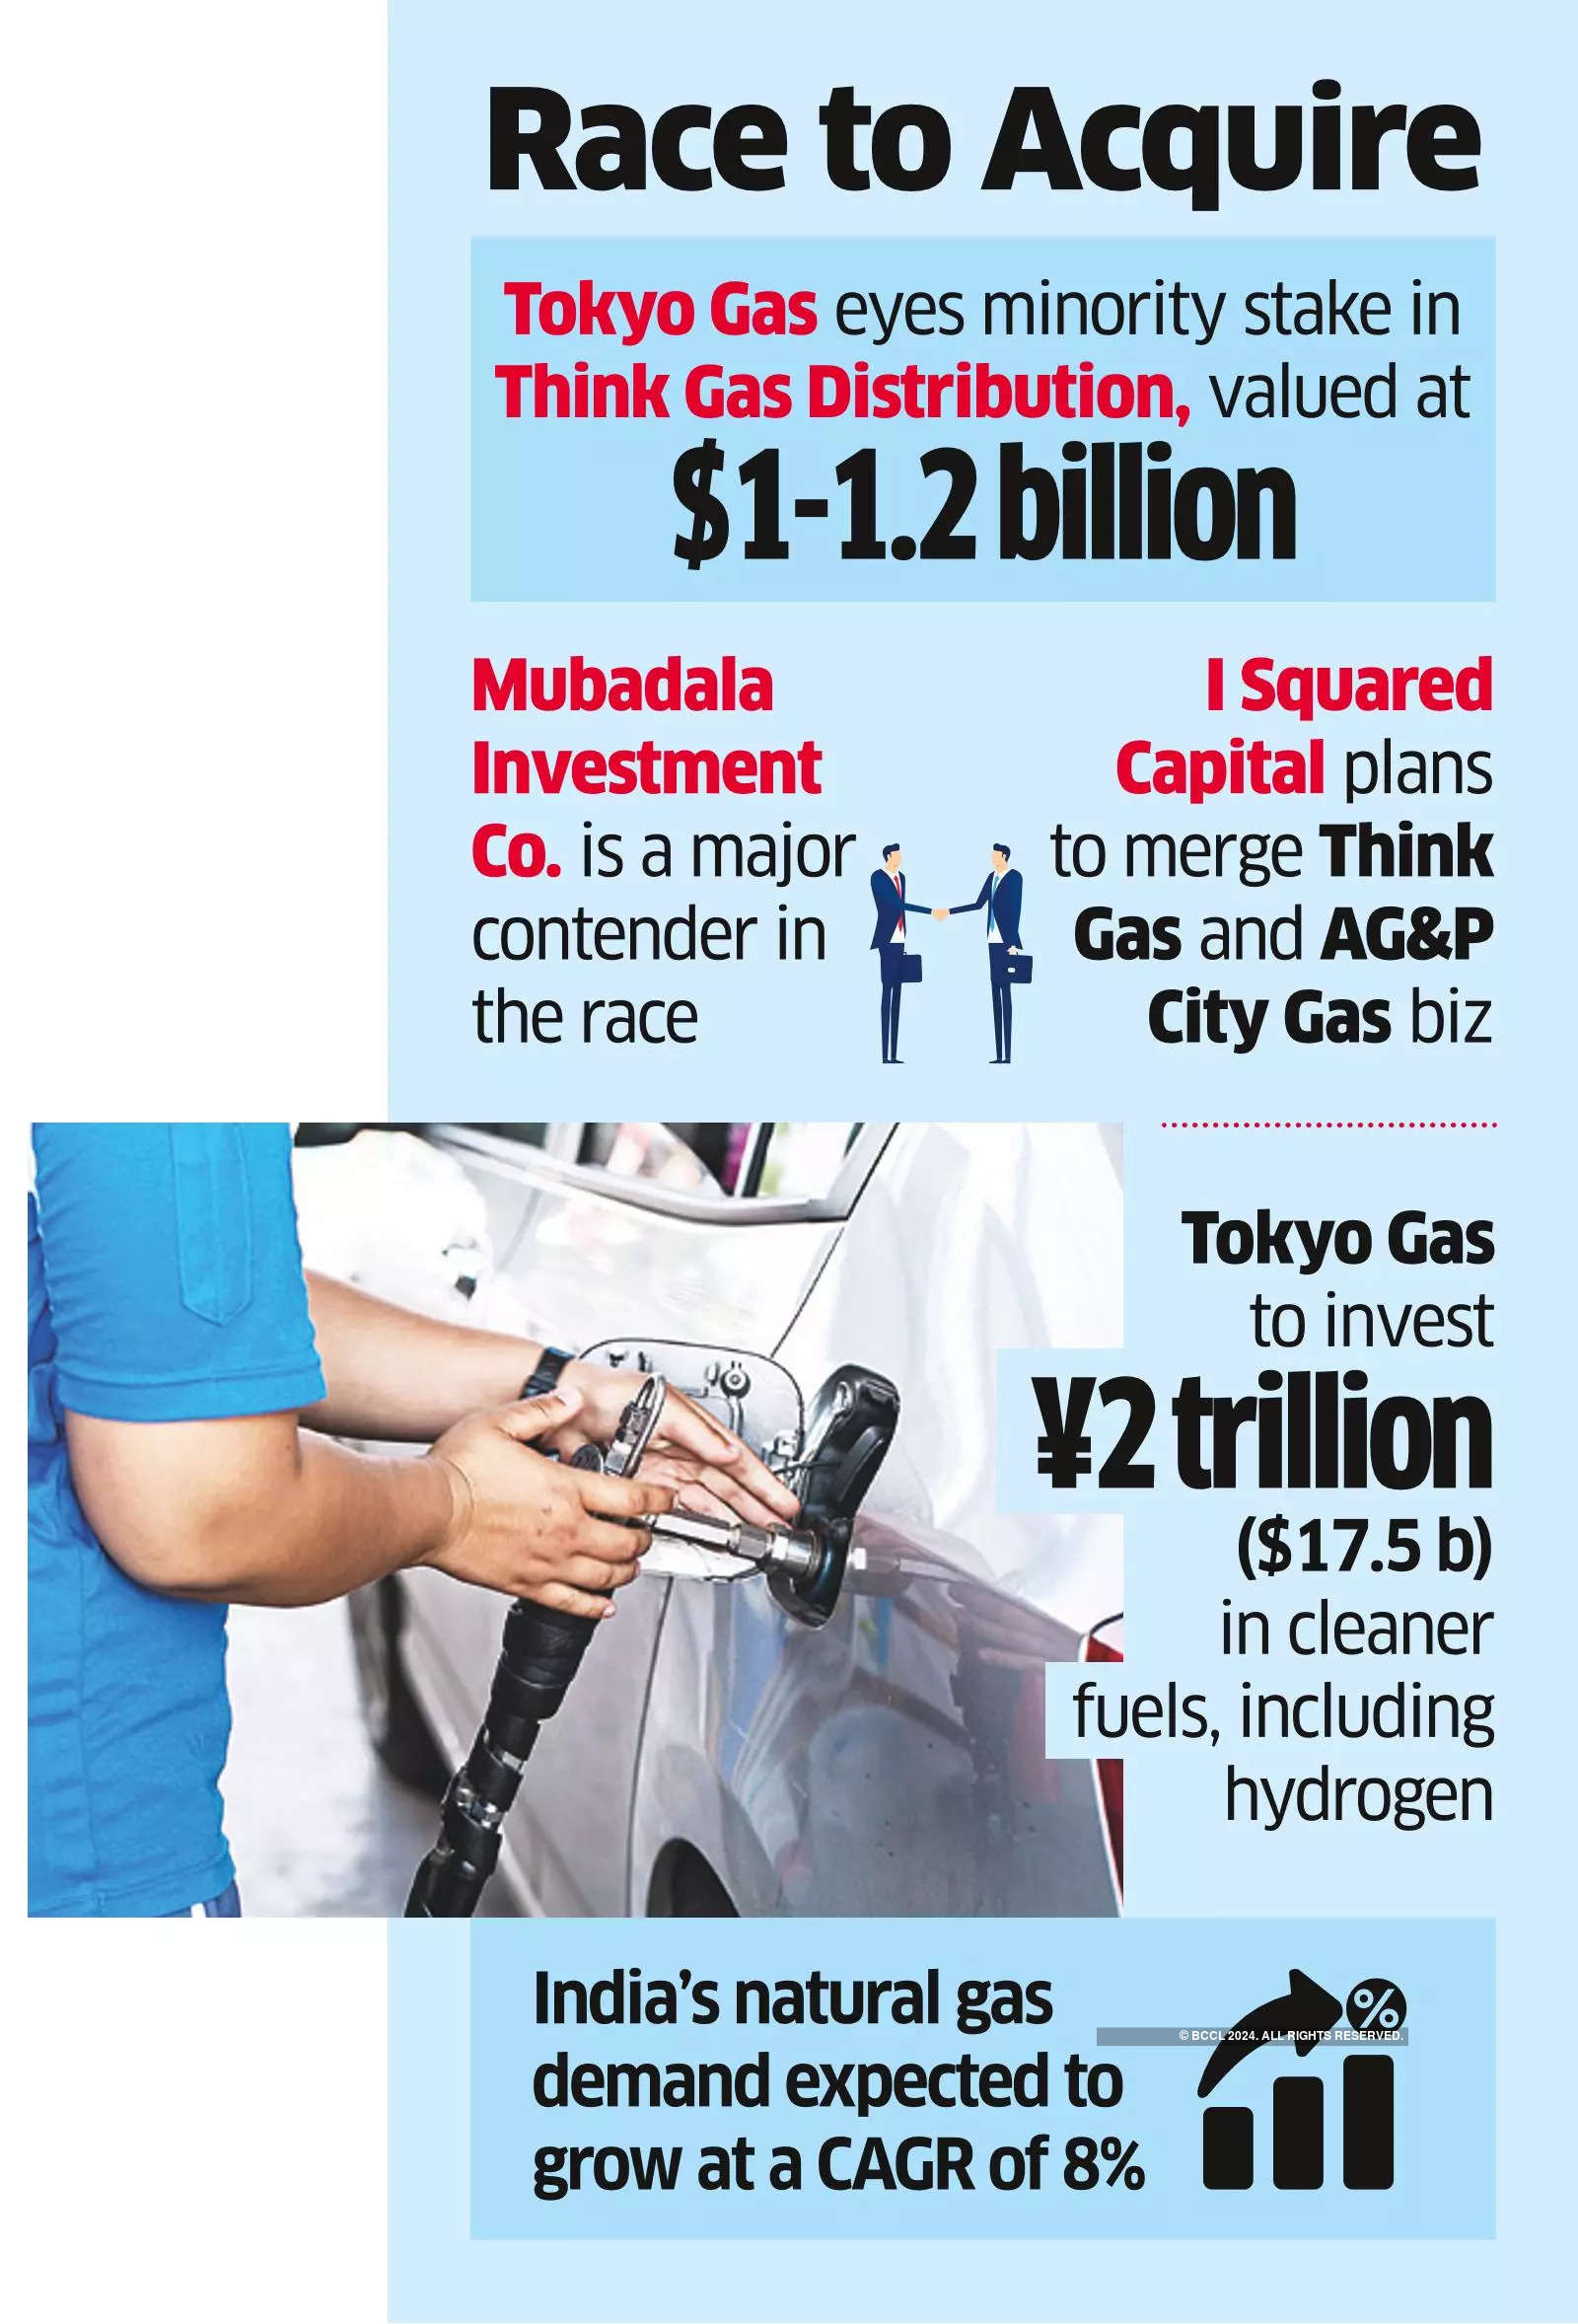 Tokyo Gas Joins Race to Acquire Stake in Think Gas Distribution